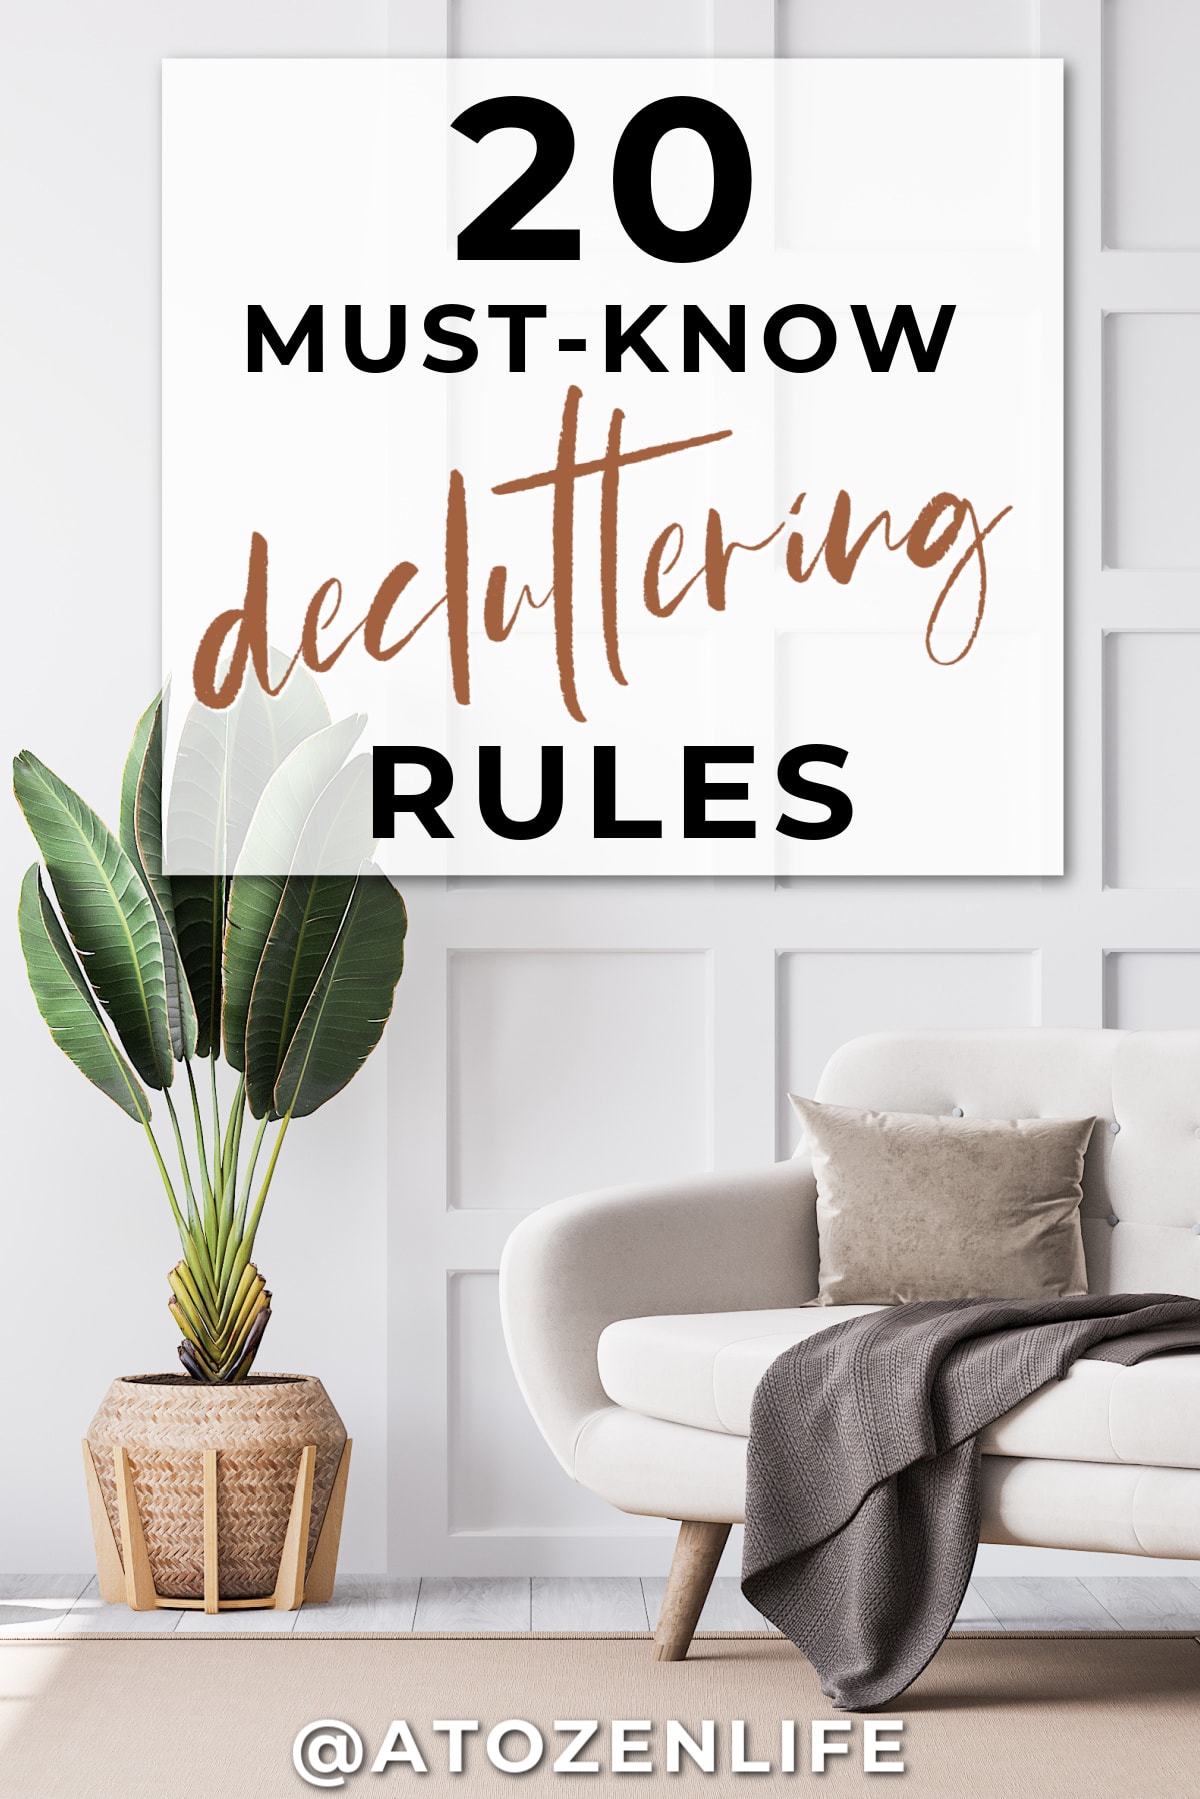 A list of the top 20 best declutter rules to get rid of clutter in your home and stay clutter-free